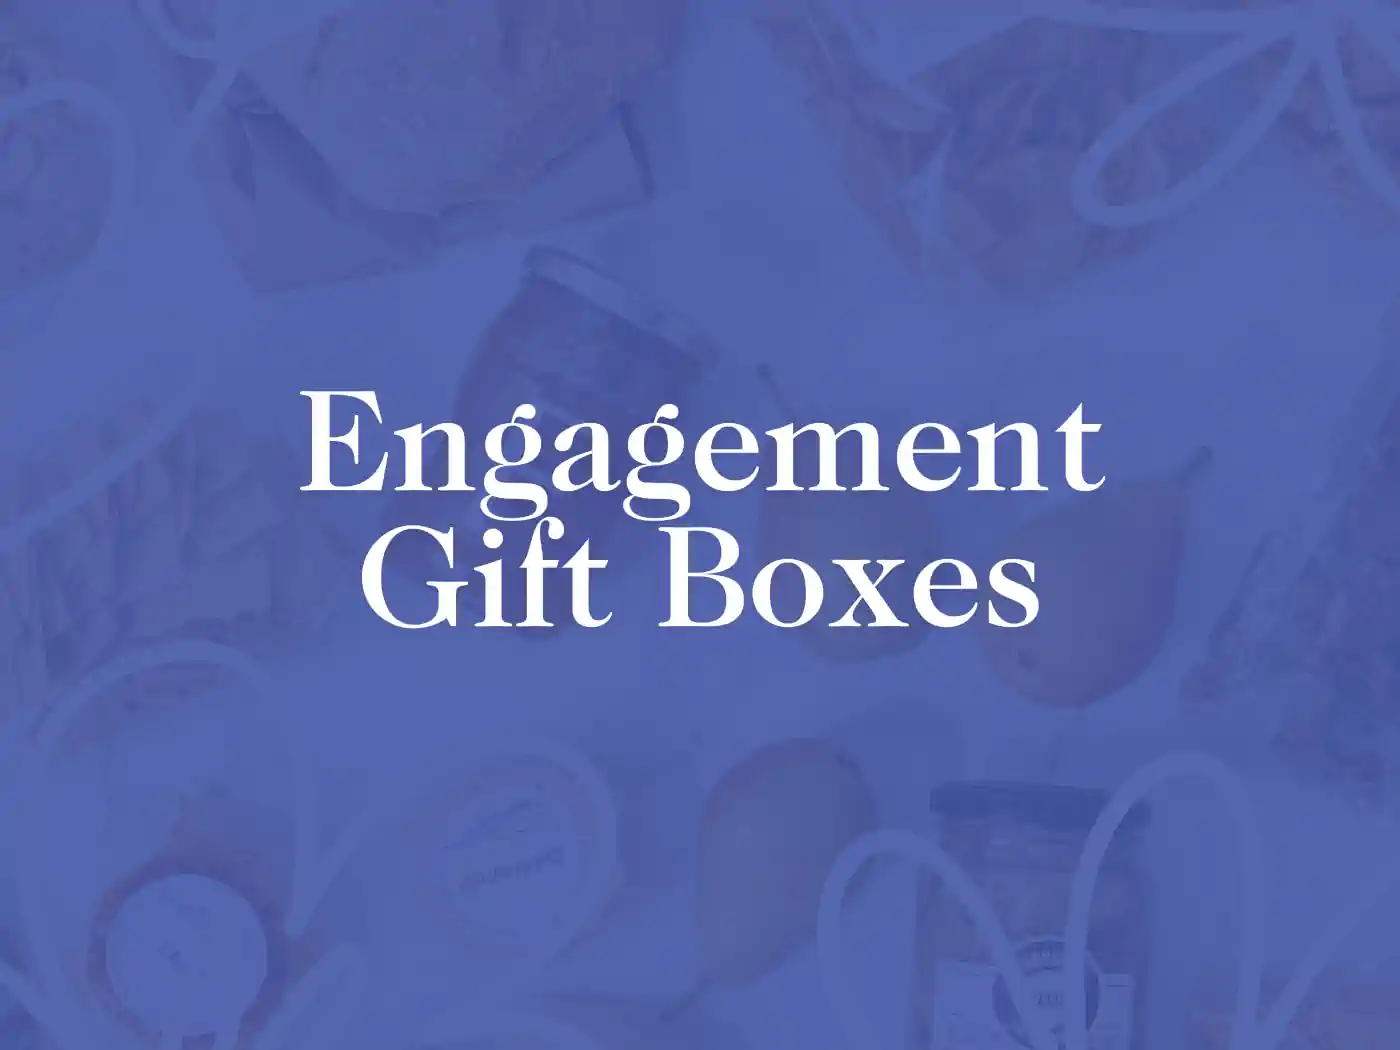 Elegant text 'Engagement Gift Boxes' set against a soft blue background filled with artistic representations of engagement gifts. This image introduces the sophisticated Engagement Gift Boxes Collection by Fabulous Flowers and Gifts, designed to make every engagement celebration special.